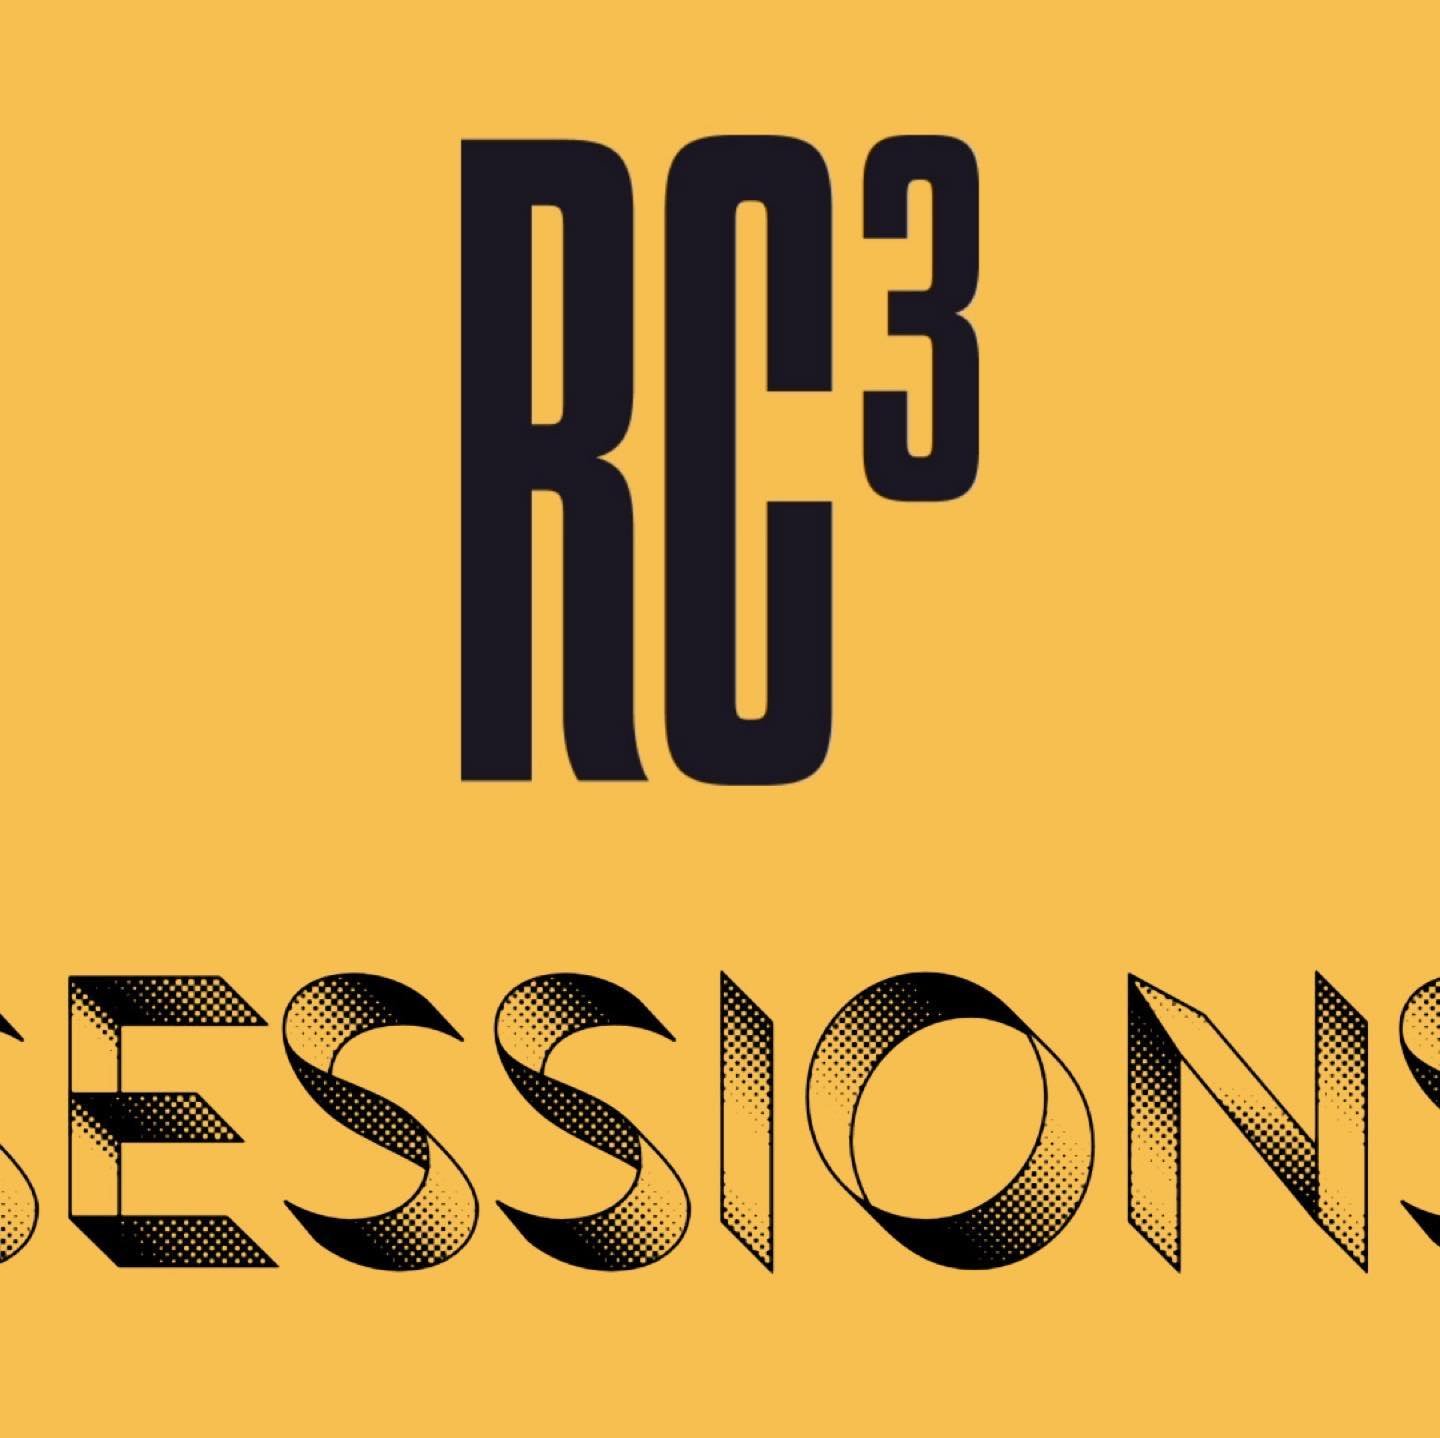 COMING SOON: 

RC&sup3; Sessions - where every event is a flavor-led adventure! From supper clubs to wine tastings, cocktail masterclasses to Summer BBQs, we are here to deliver a bespoke culinary adventure. Head to the website to sign up for updates